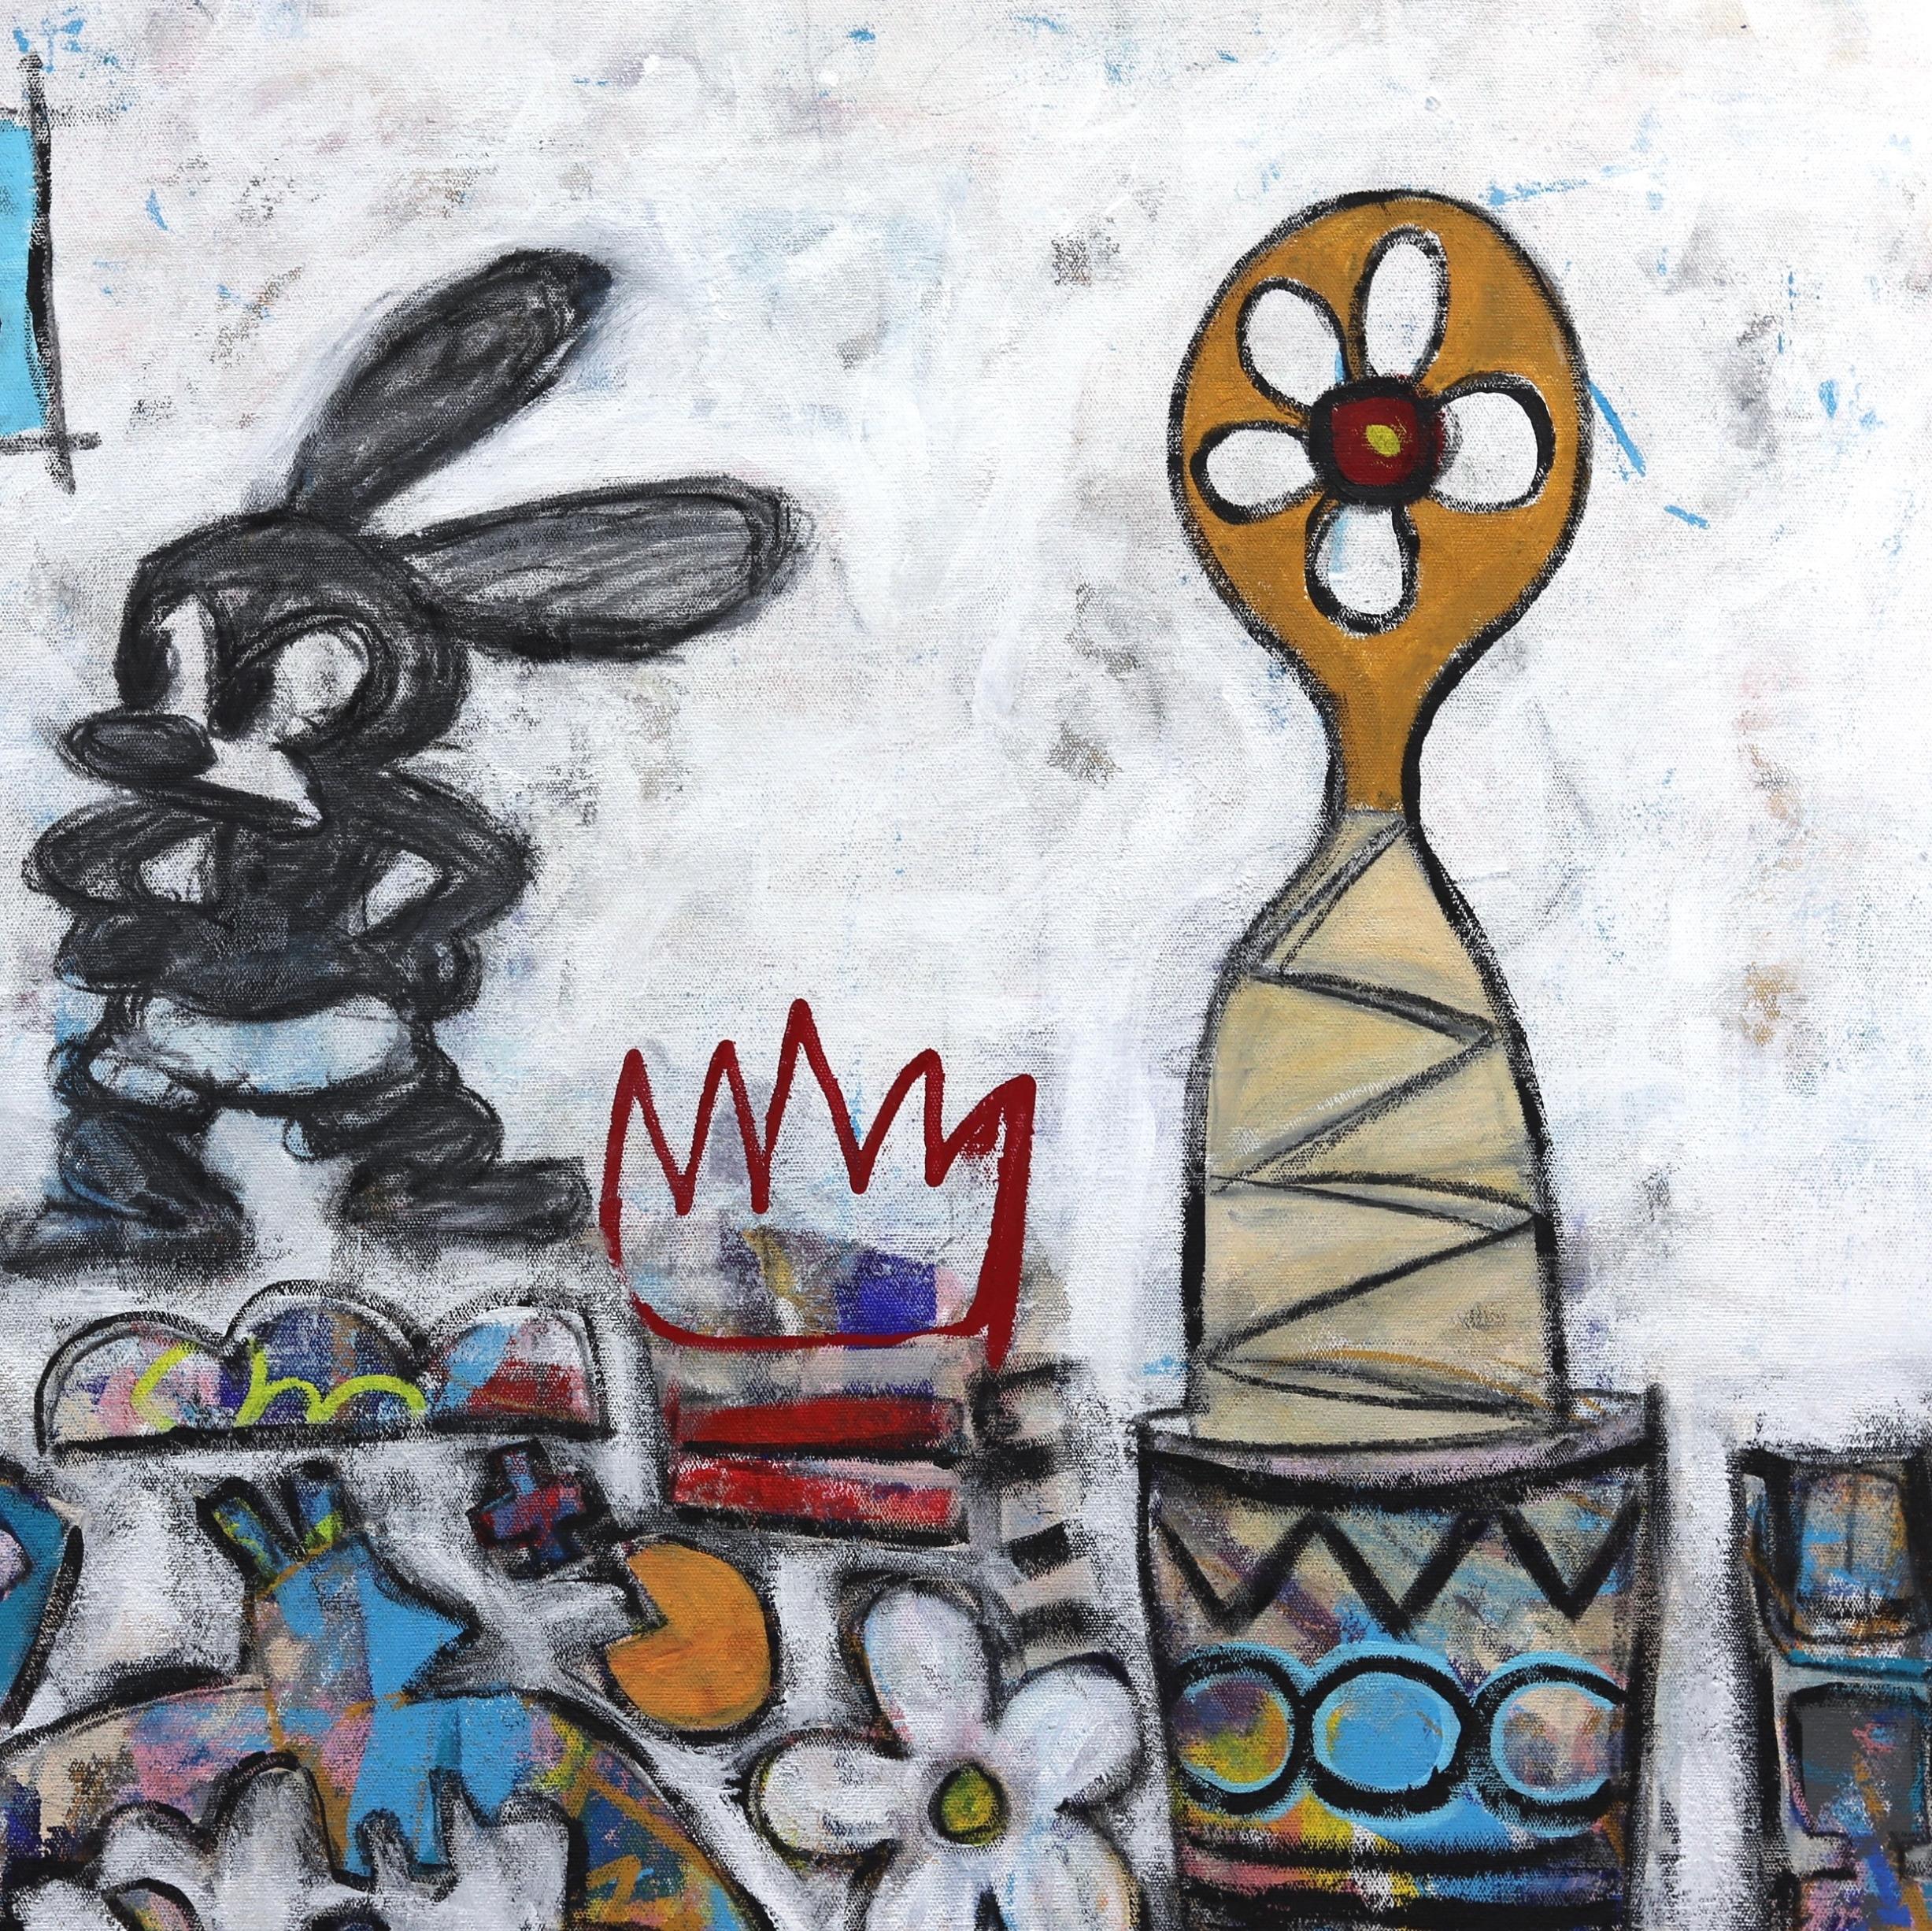 Oswald the Rabbit! Large Colorful Ispiring Neo-Expressionist Pop Art Painting  - Gray Abstract Painting by Tommy Lennartsson